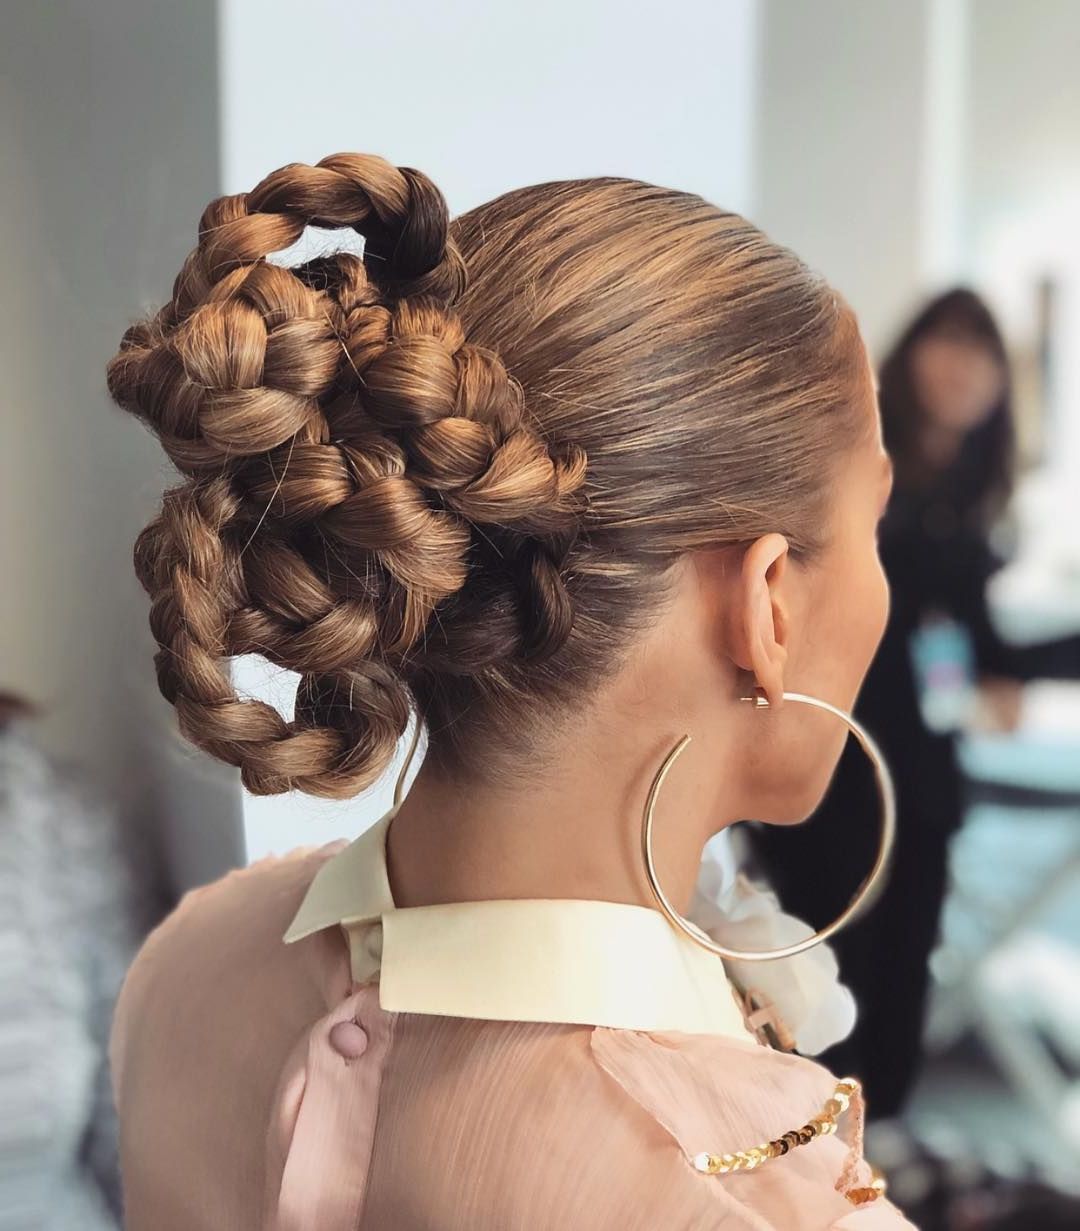 Most Current Braided Updo For Long Hair Regarding 20 Braided Updo Hairstyles – Pictures Of Pretty Updos With Braids (View 11 of 15)